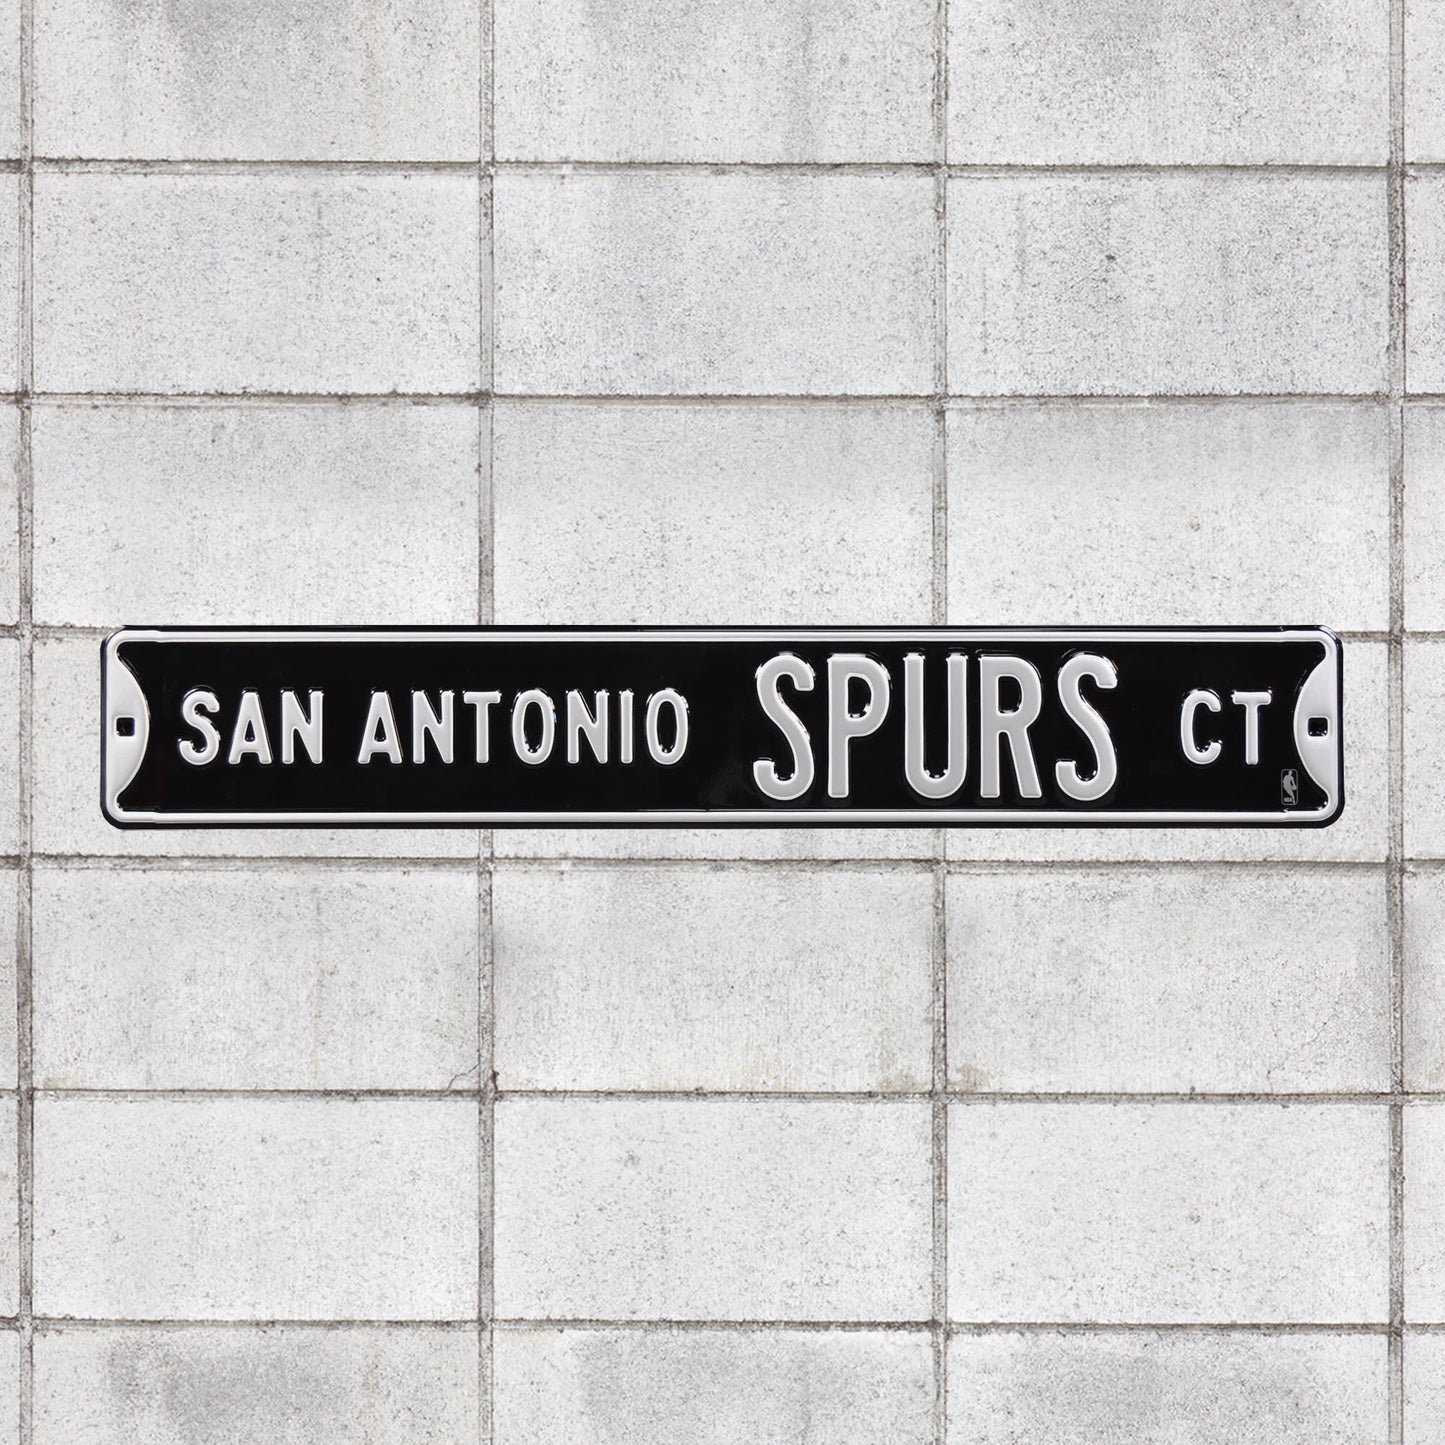 San Antonio Spurs: Court - Officially Licensed NBA Metal Street Sign